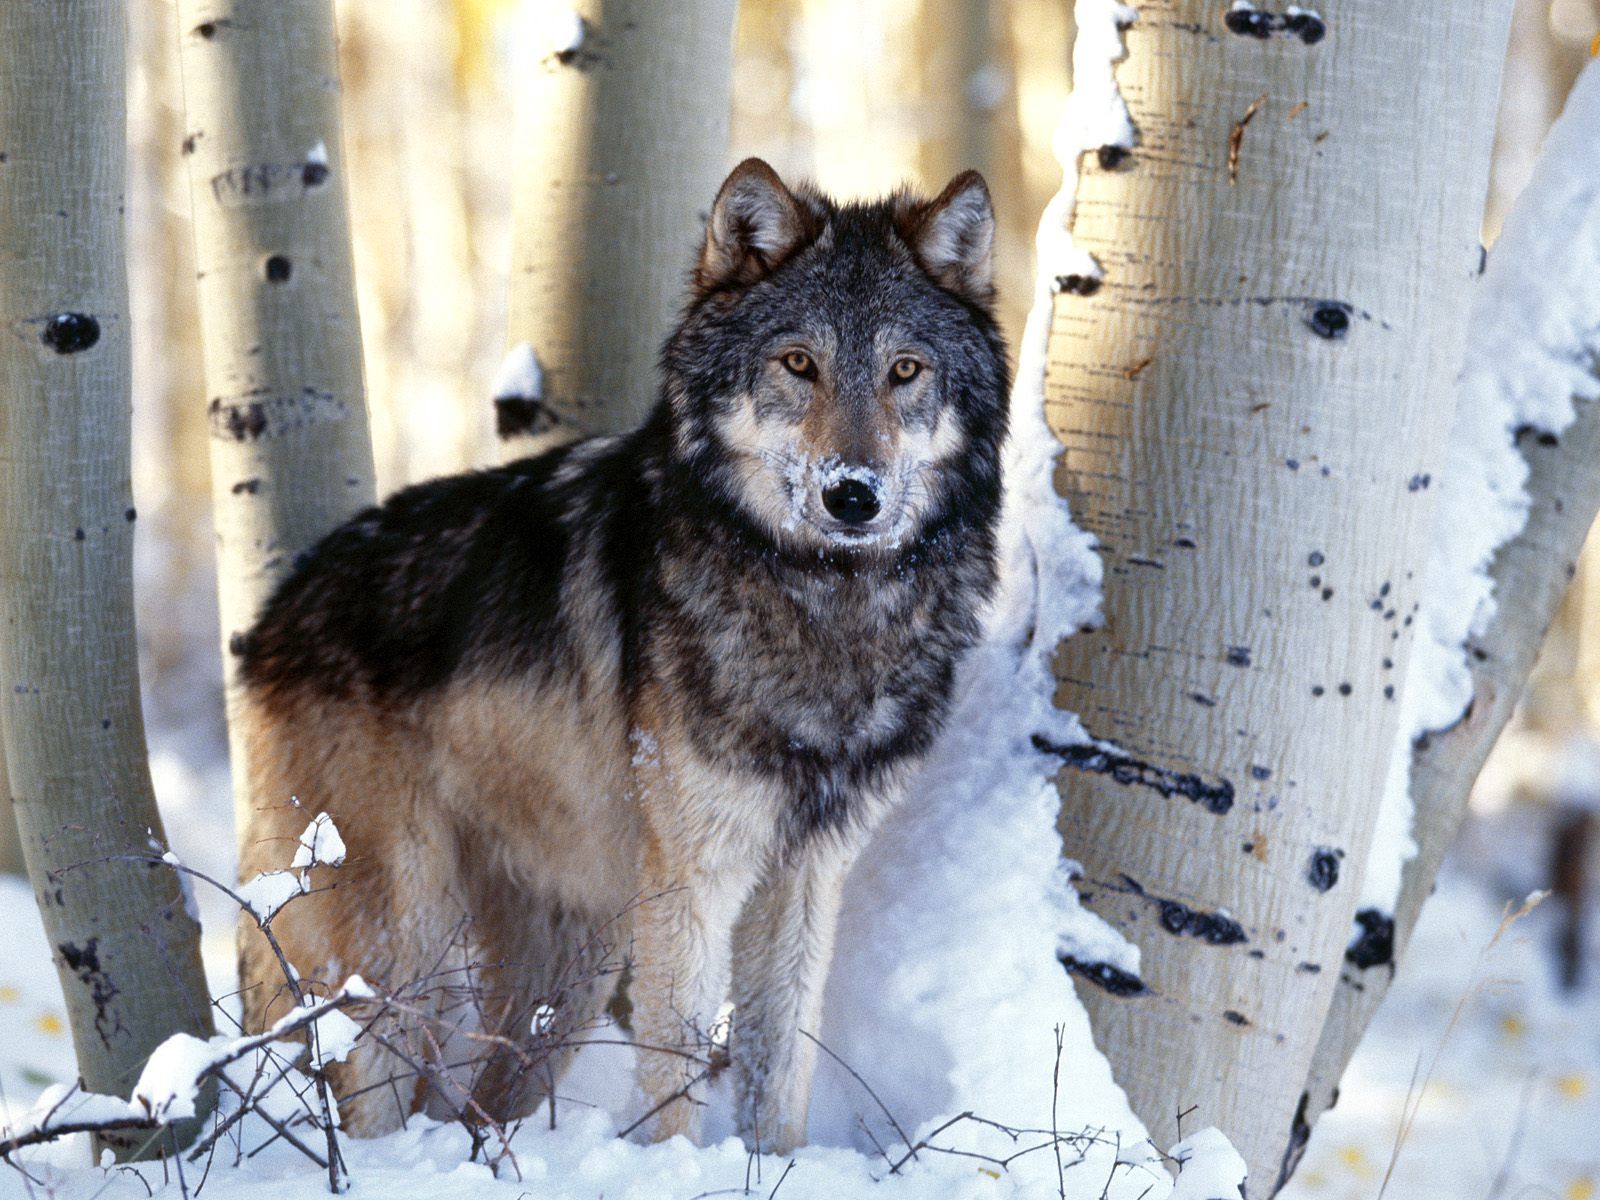 60768 download wallpaper wolf, animals, winter, trees, snow, predator screensavers and pictures for free